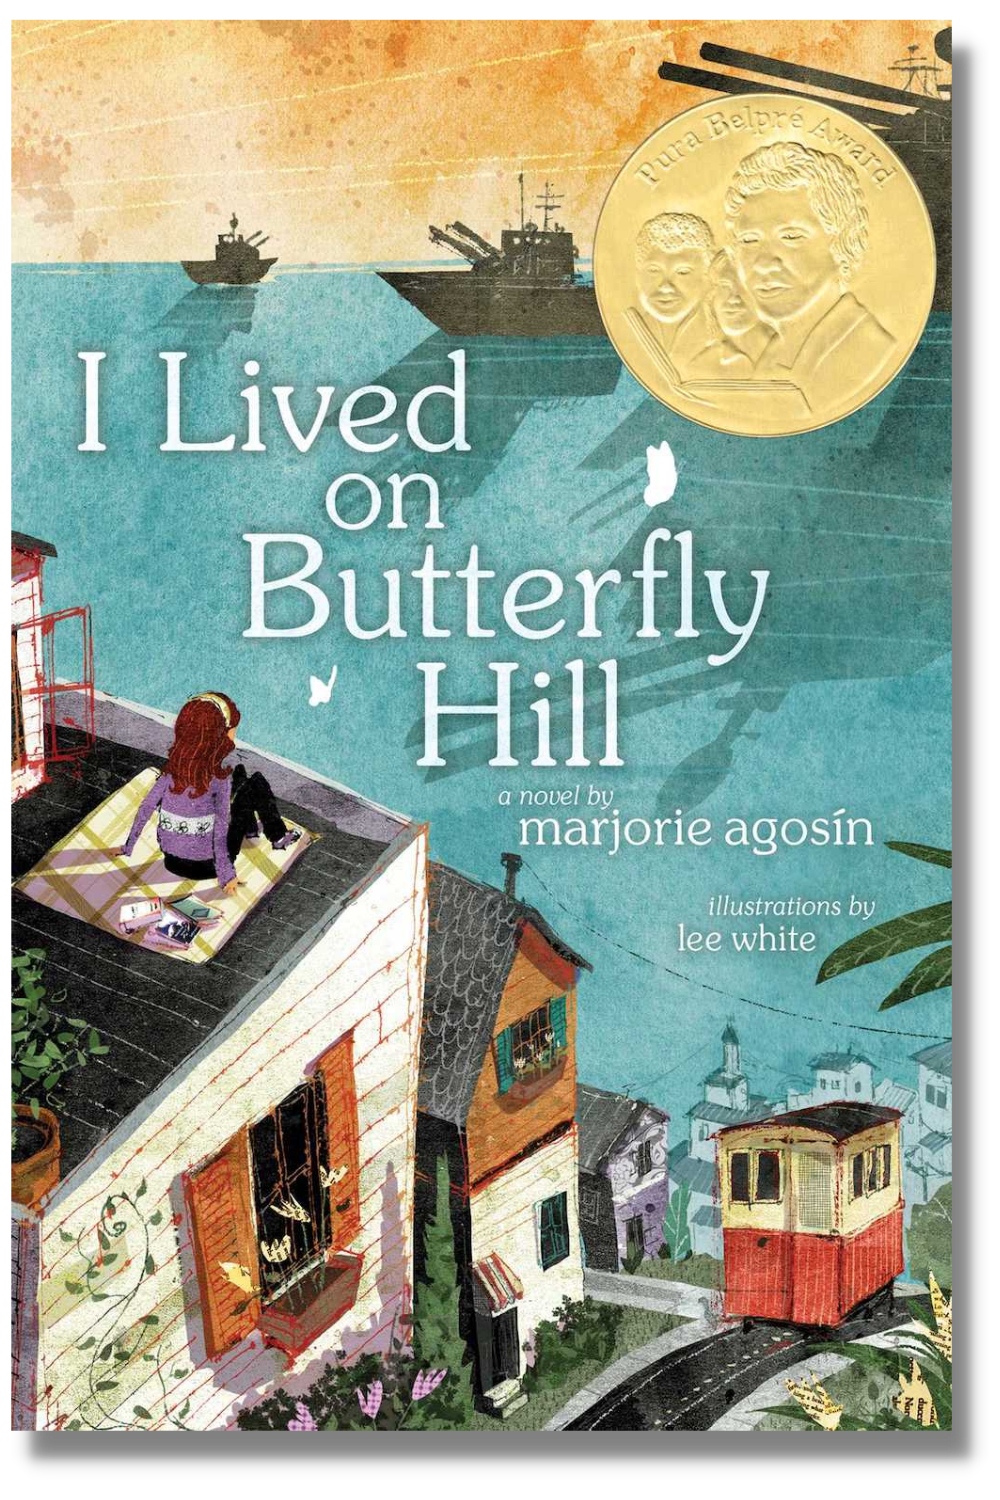 The cover of "I Lived on Butterfly Hill"